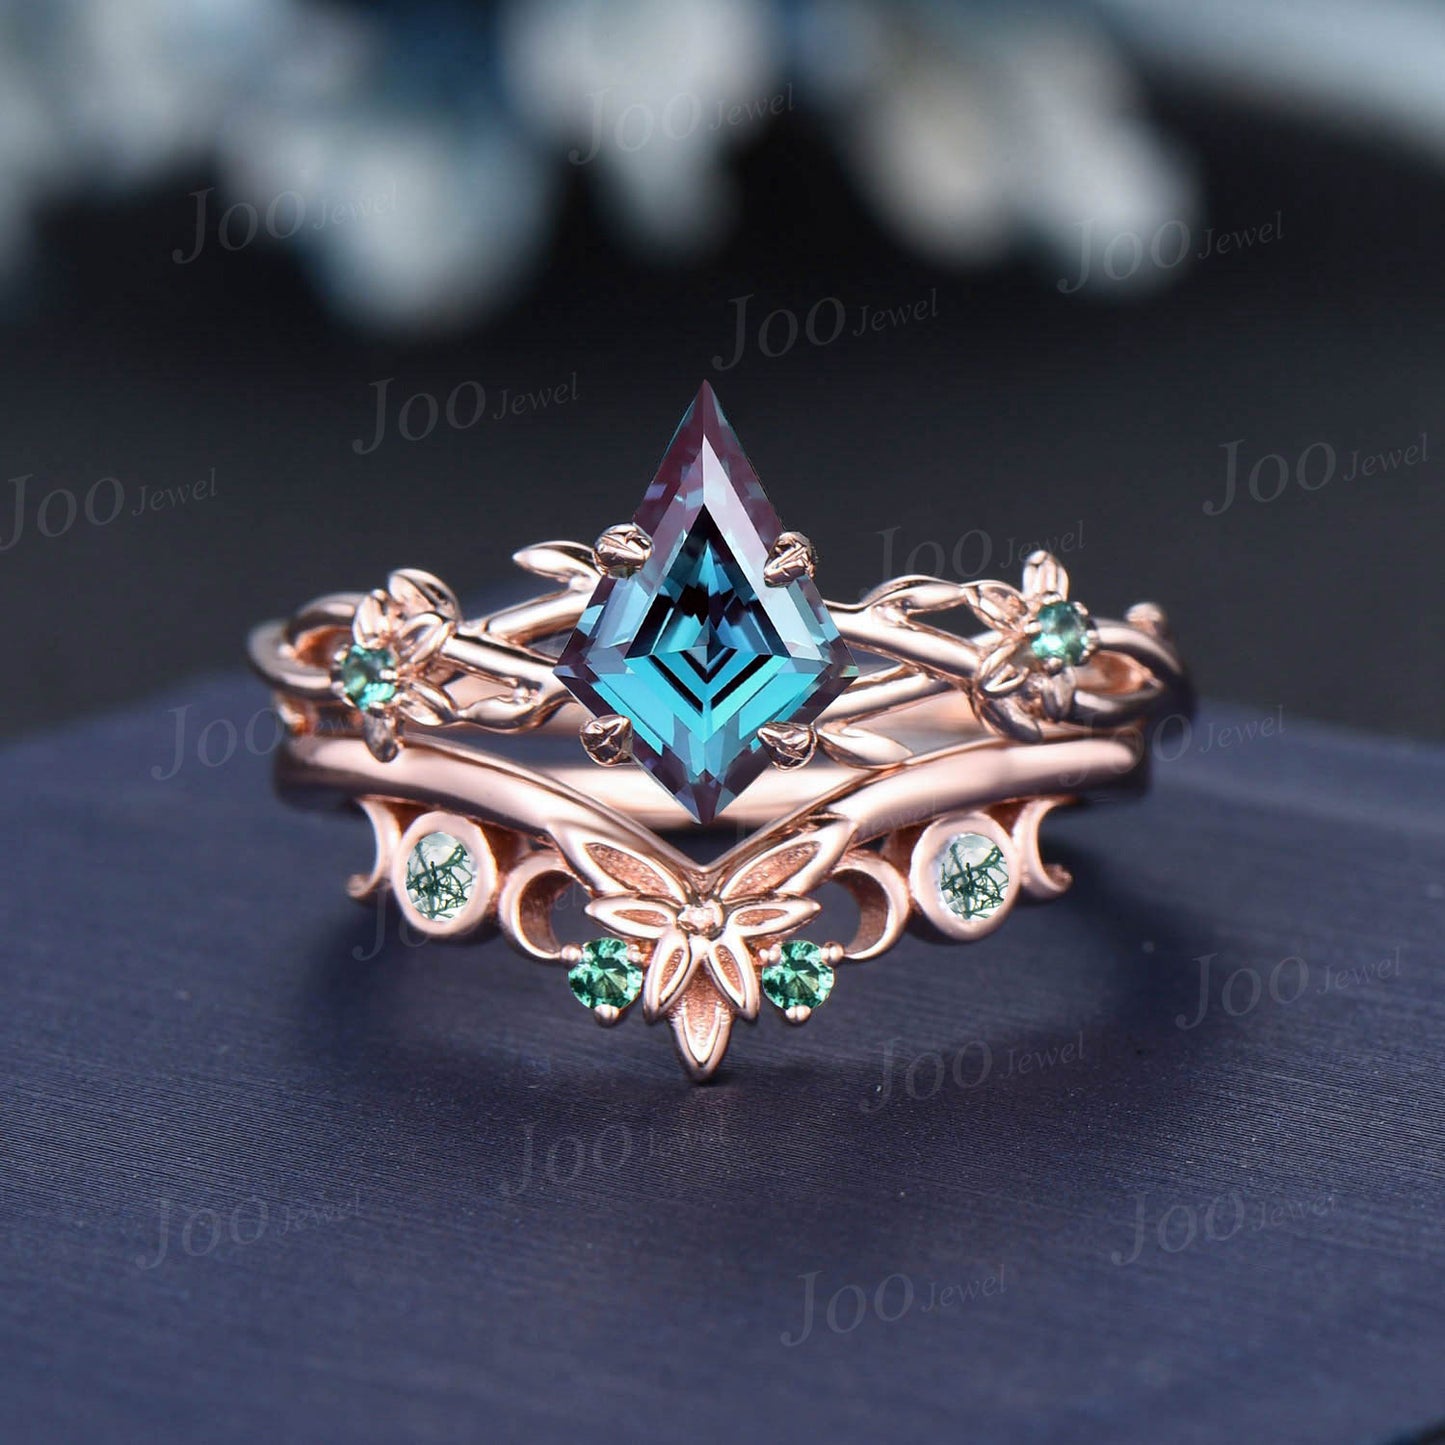 1ct Kite Cut Color-Change Alexandrite Emerald Bridal Set 14K Rose Gold Twisted Twig Vine Green Moss Agate Celtic Knot Wedding Band for Women